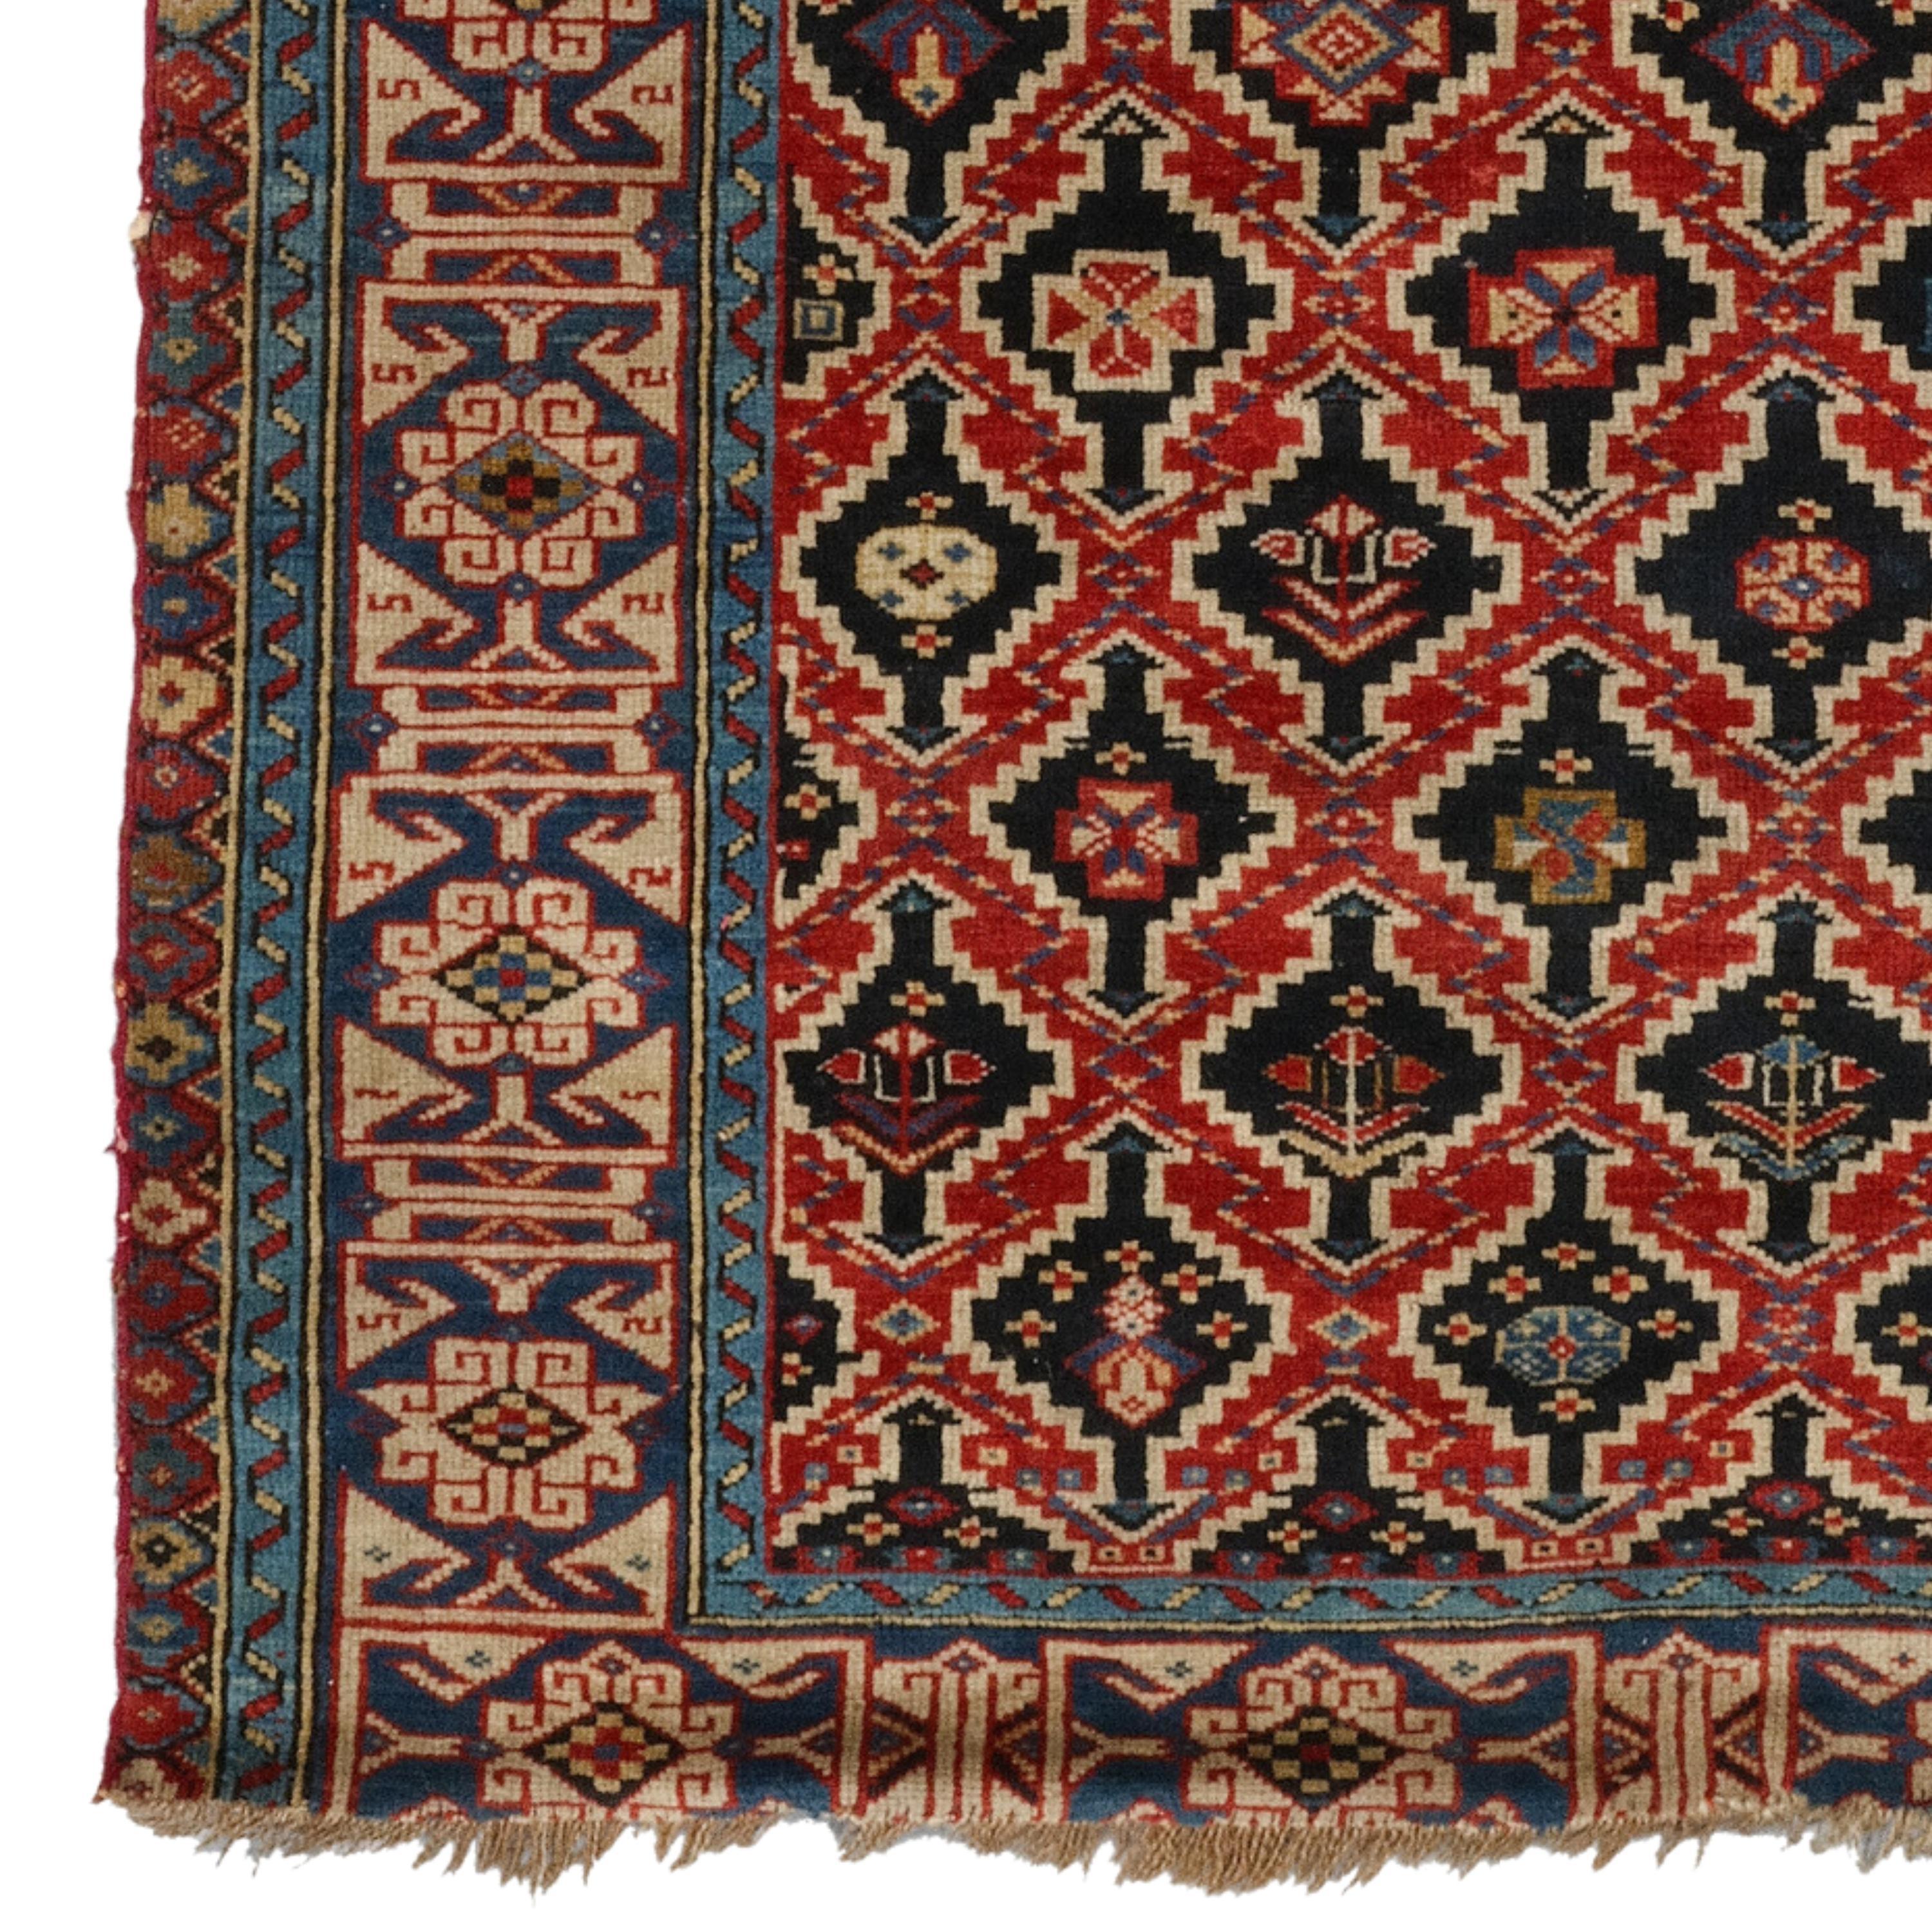 Middle Of The 19th Century Caucasian Kuba Shirvan Rug
Size 105 x 125 cm (3,44 - 4,1 ft)

Add Color and Culture to Your Home: 19th Century Caucasian Kuba Shirvan Carpet

Would you like to add both color and culture to the decoration of your home?